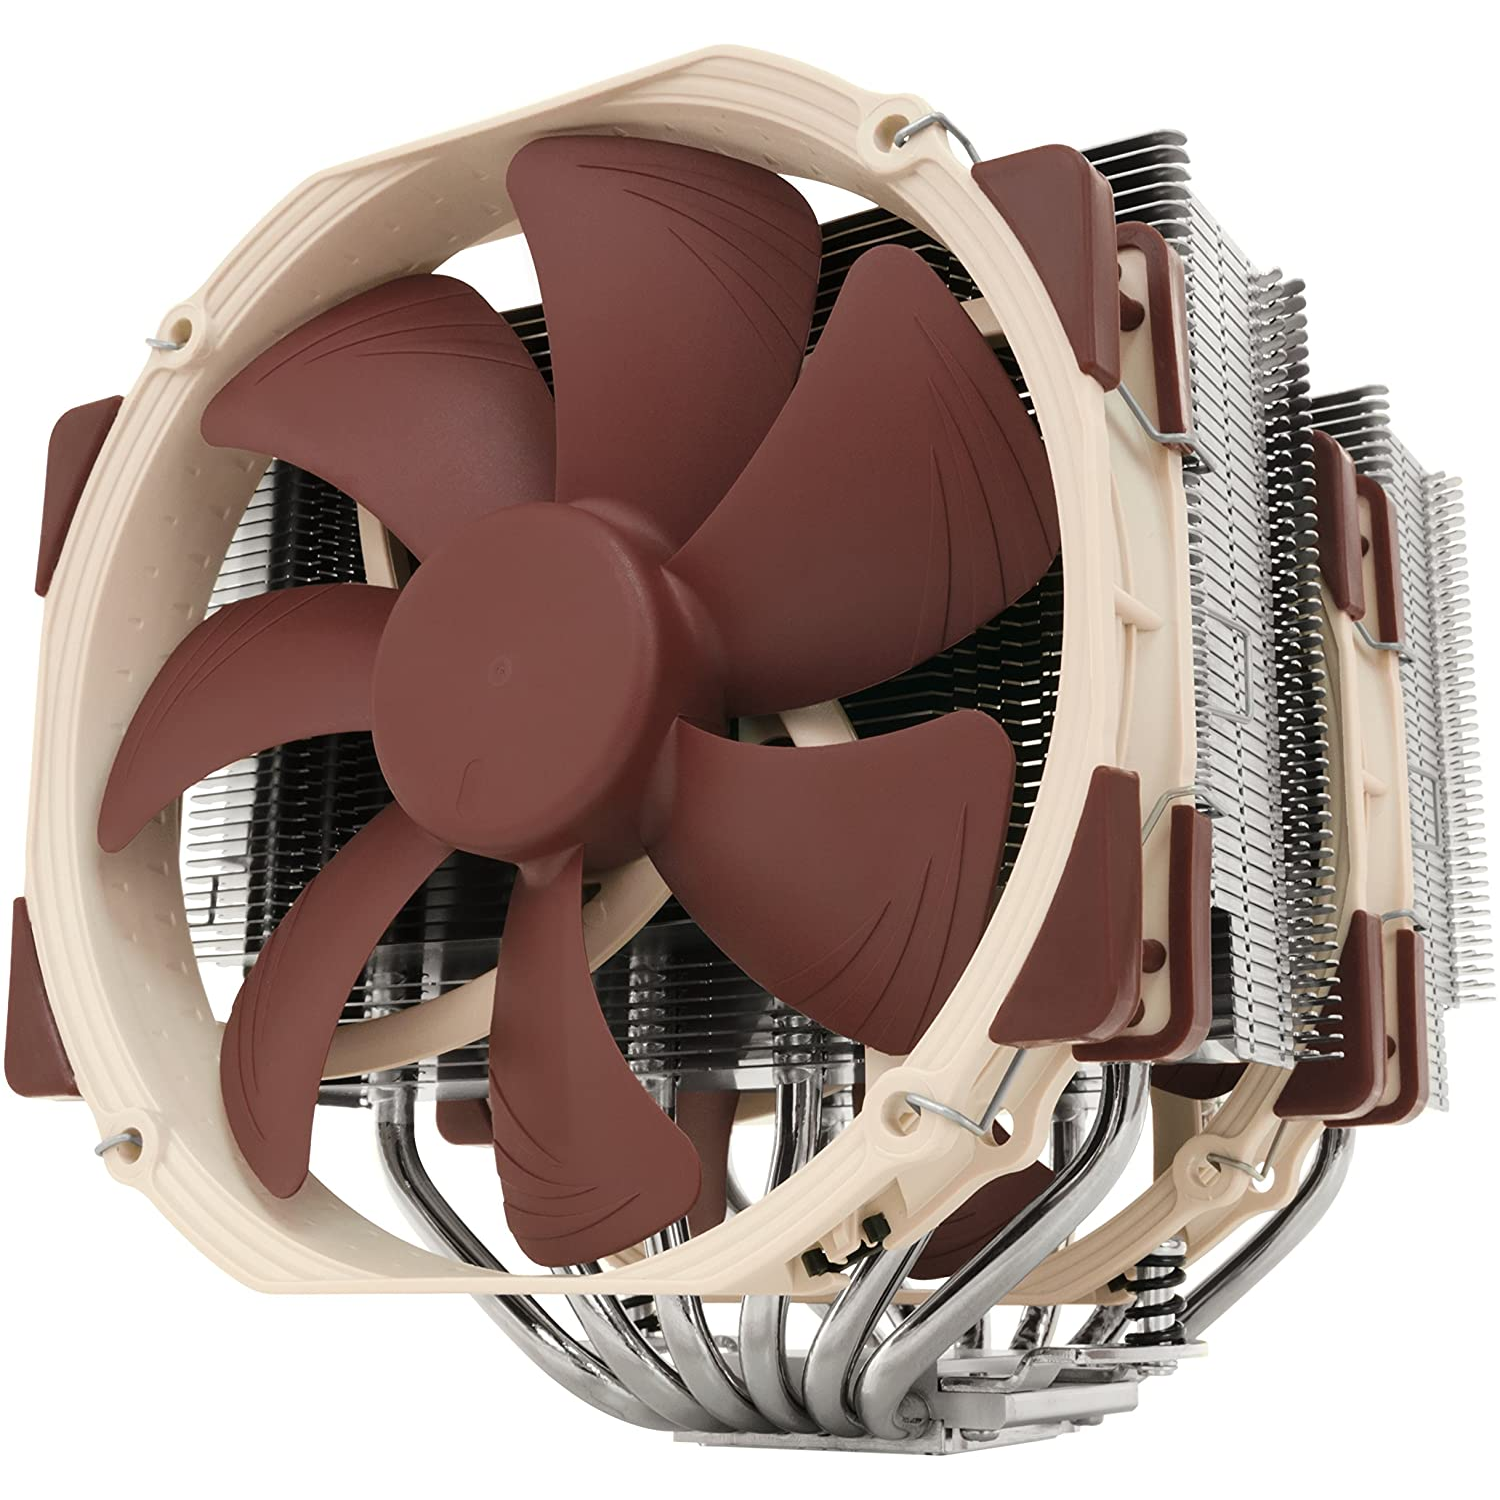 Revive Ministry Go to the circuit The 10 Best CPU Coolers in 2021 - Liquid and Air CPU Coolers